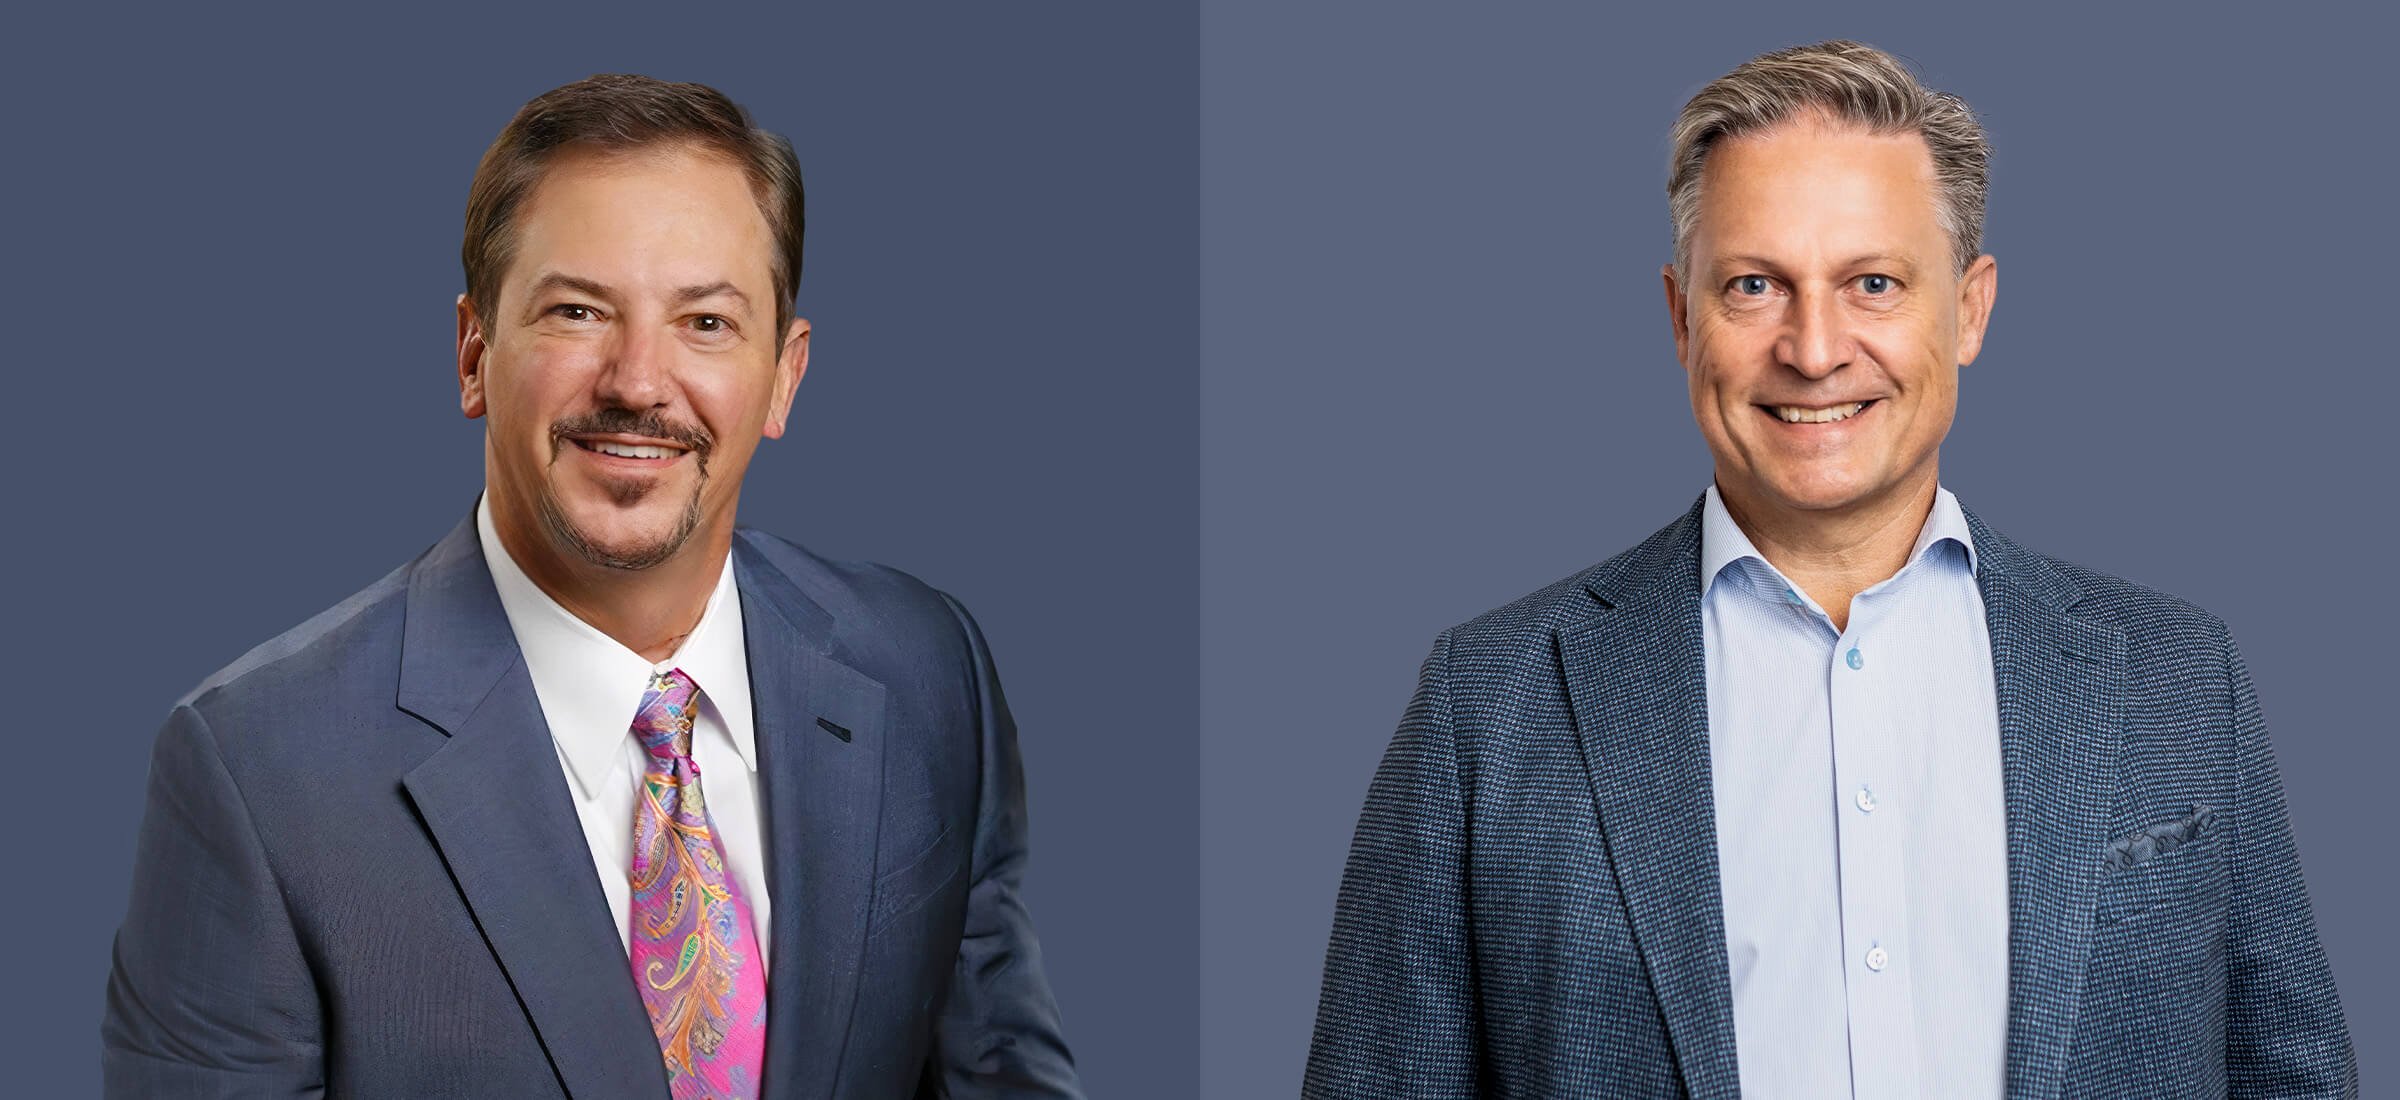 Airtame appoints new sales executives to spearhead growth in U.S. and EMEA regions